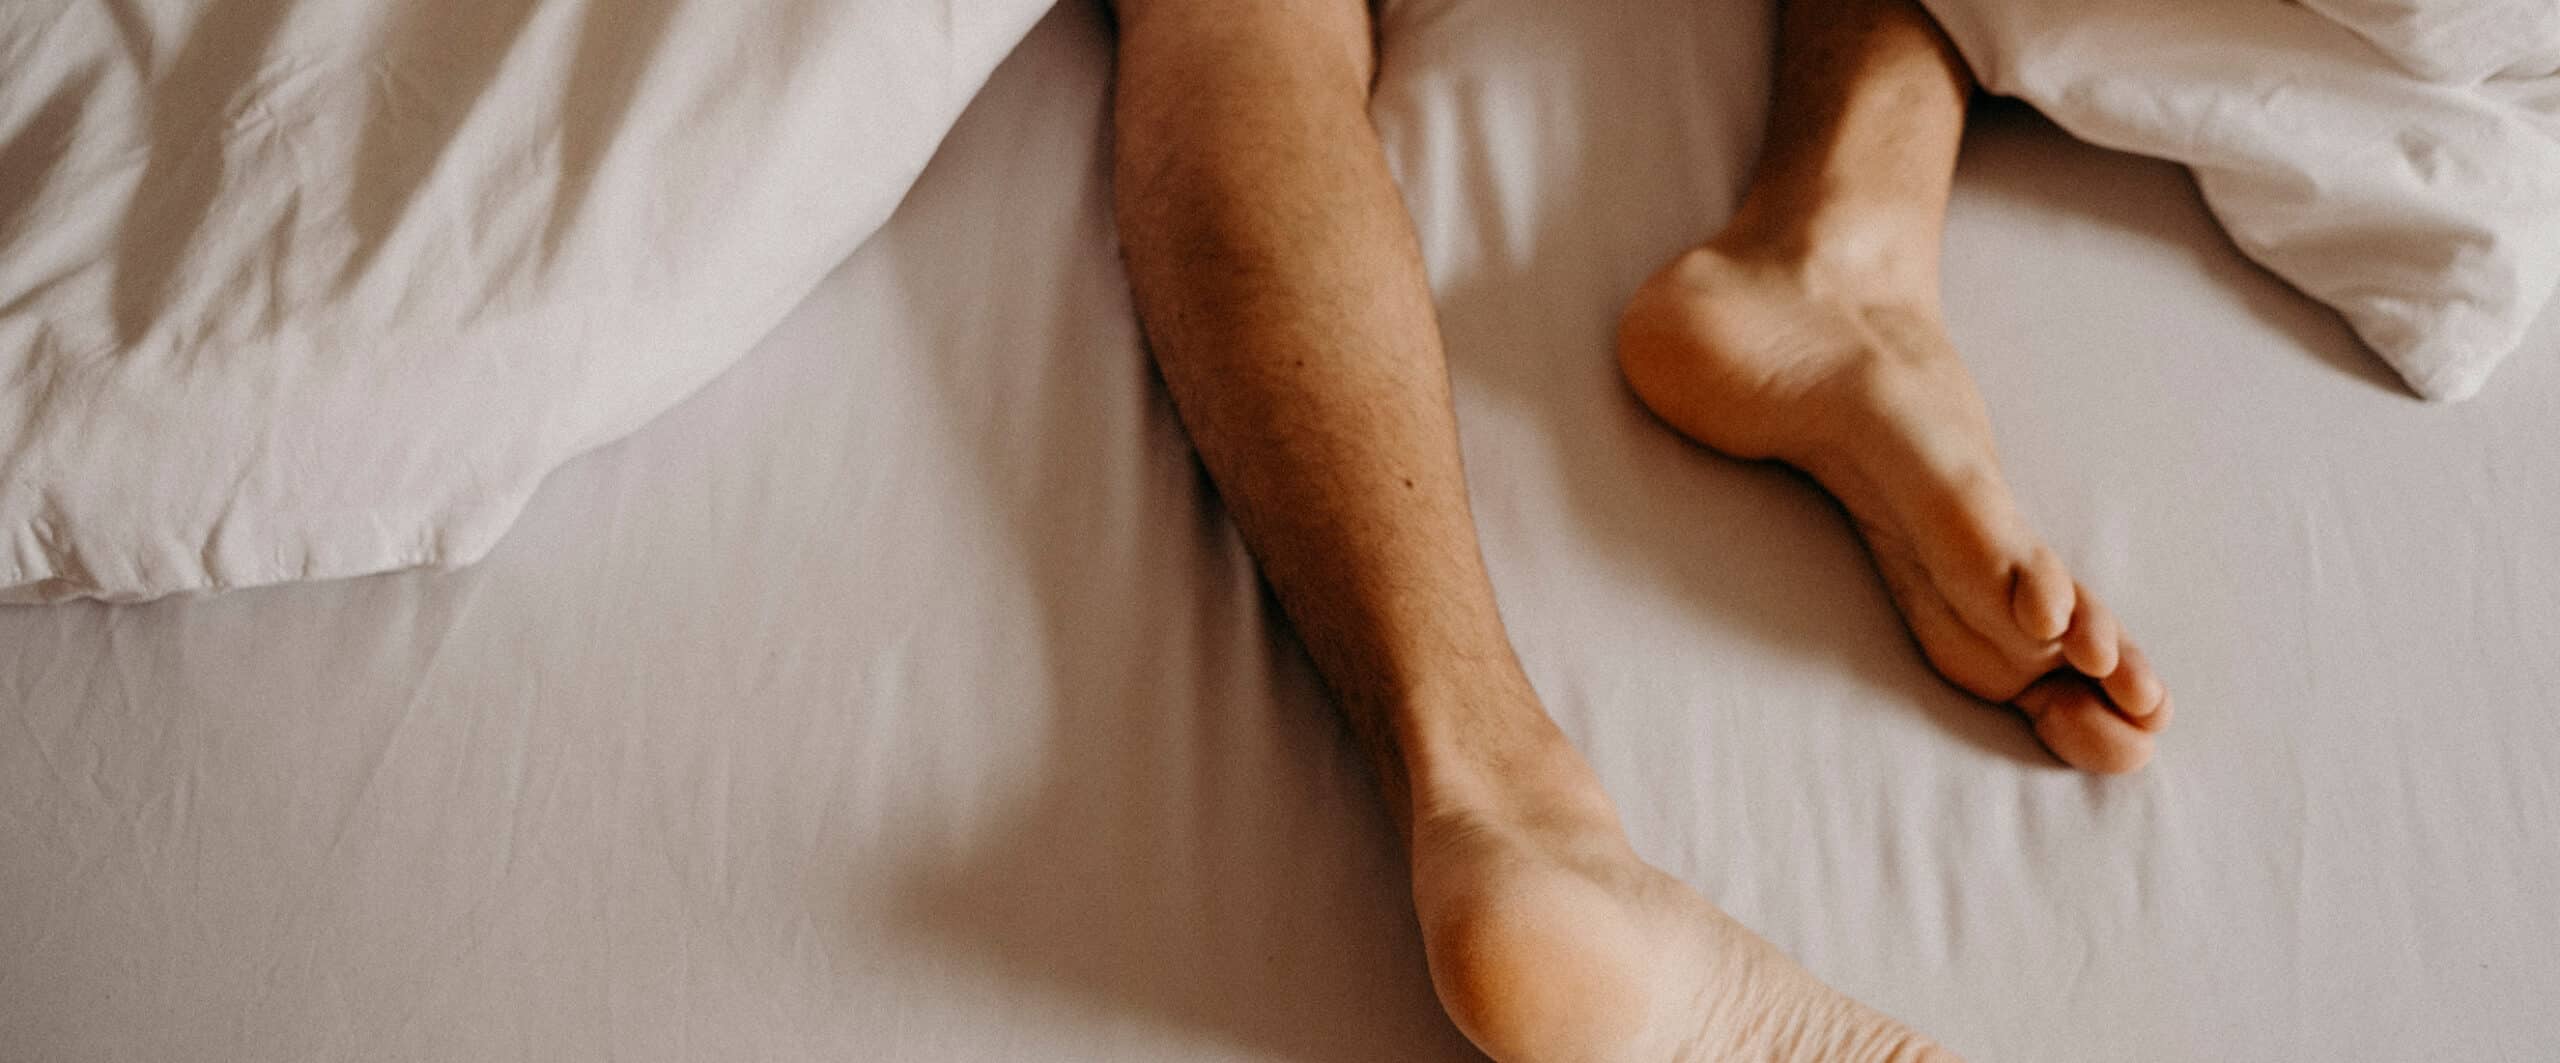 a close up of man's feet out of the bottom of a quilt